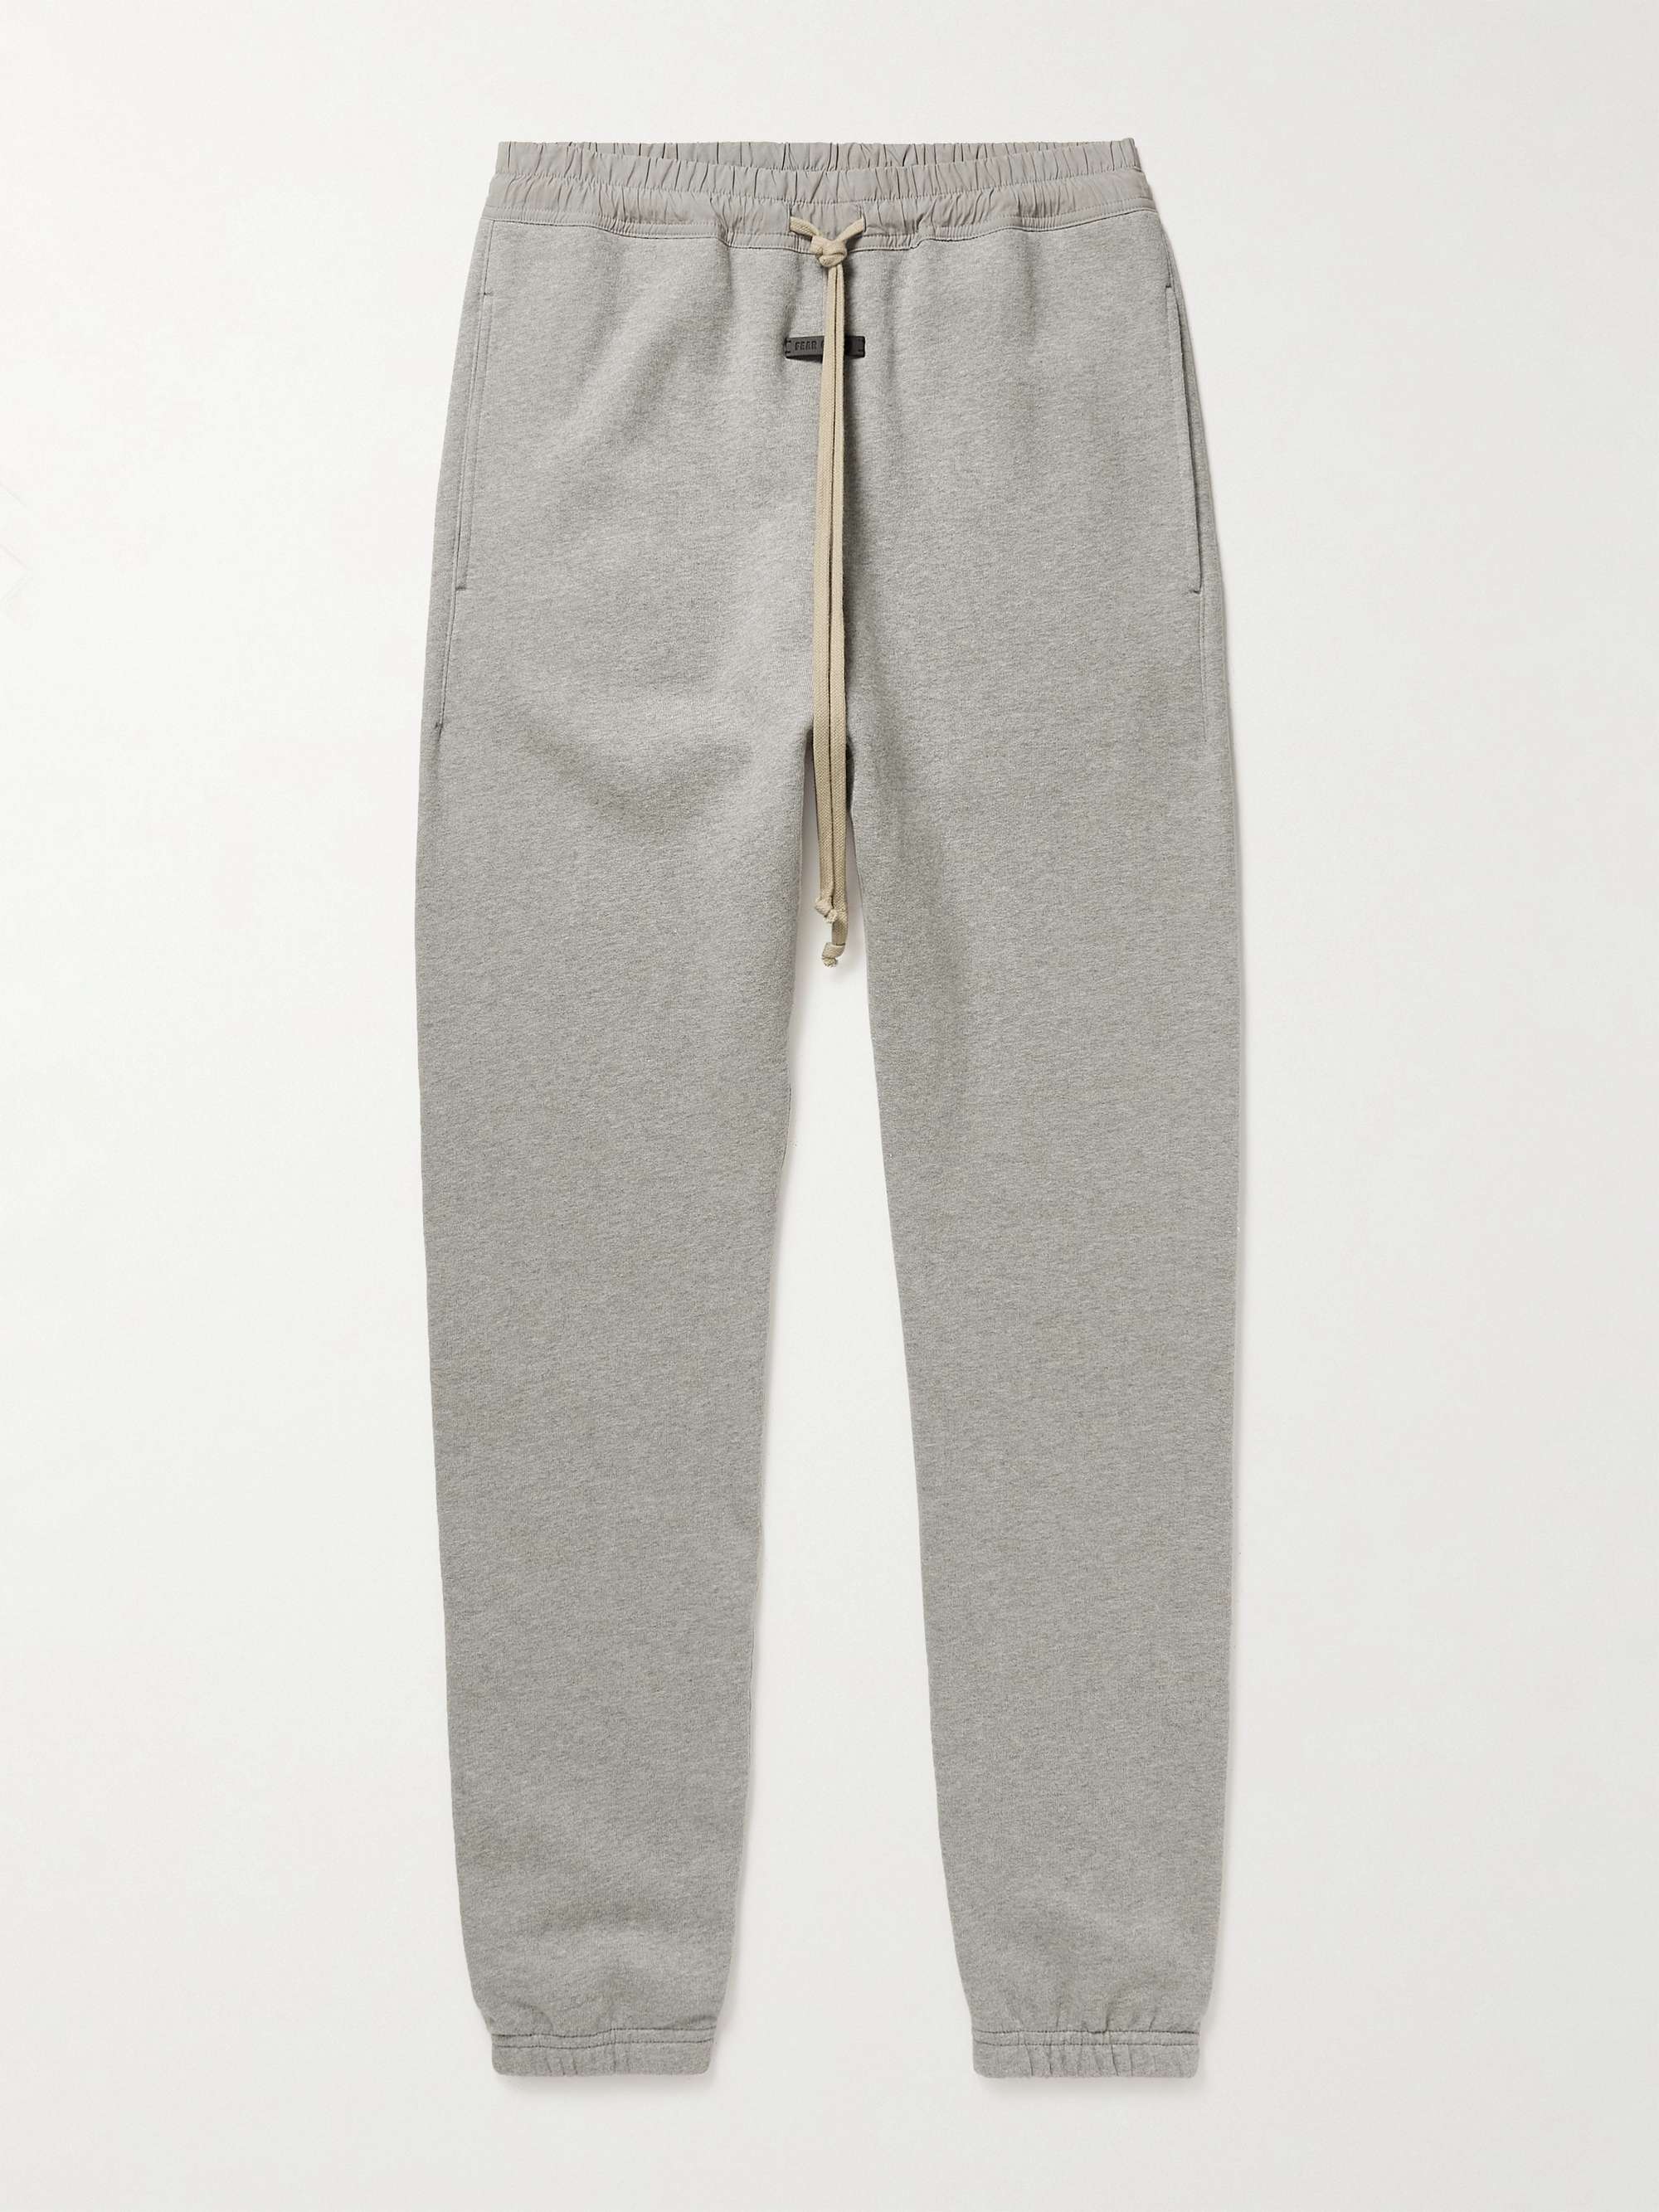 FEAR OF GOD The Vintage Tapered Cotton-Jersey Sweatpants